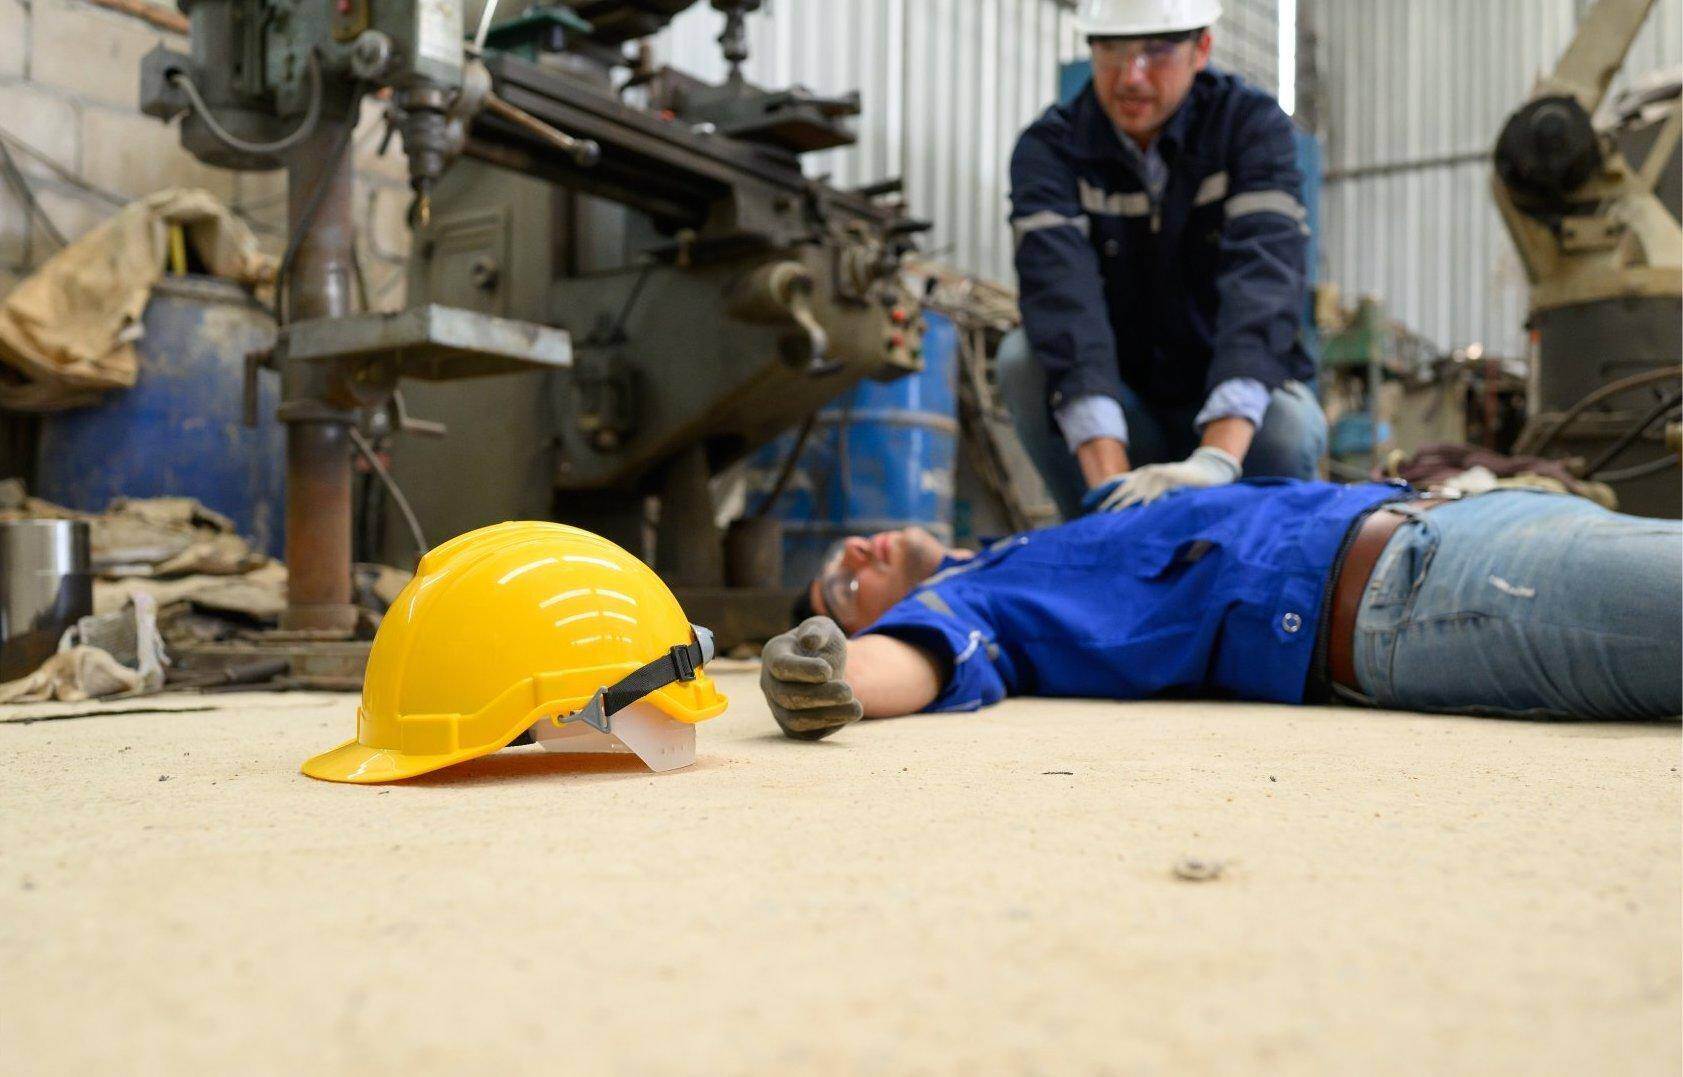 An unconscious man who has been injured on the job who will file for workers compensation in Norcross, Georgia